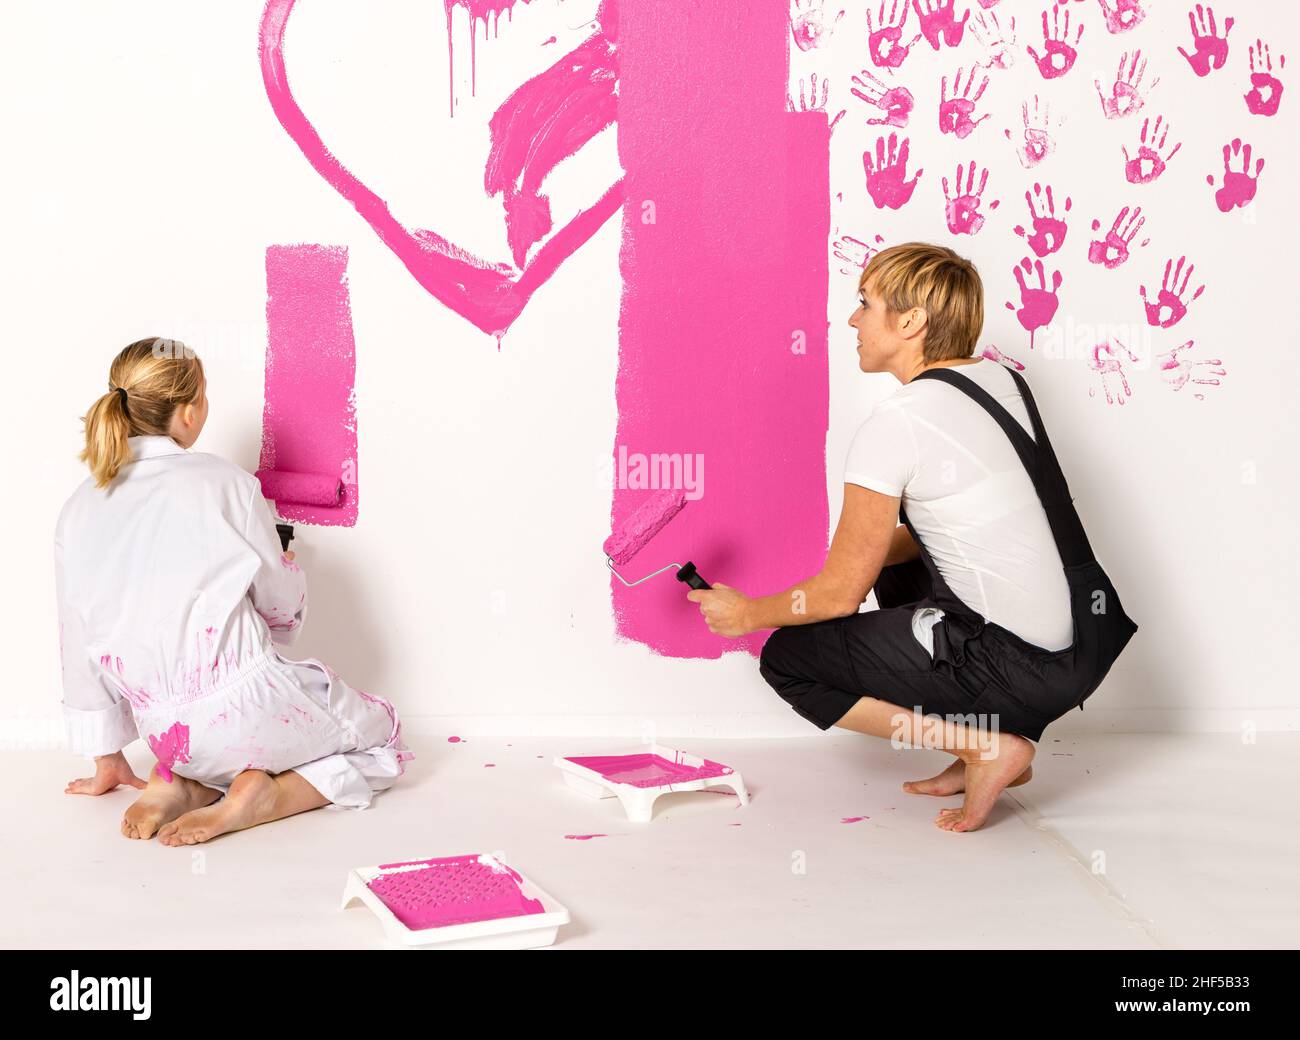 Mother and daughter is painting with pink paint on a white wall. Both are sitting down. Stock Photo